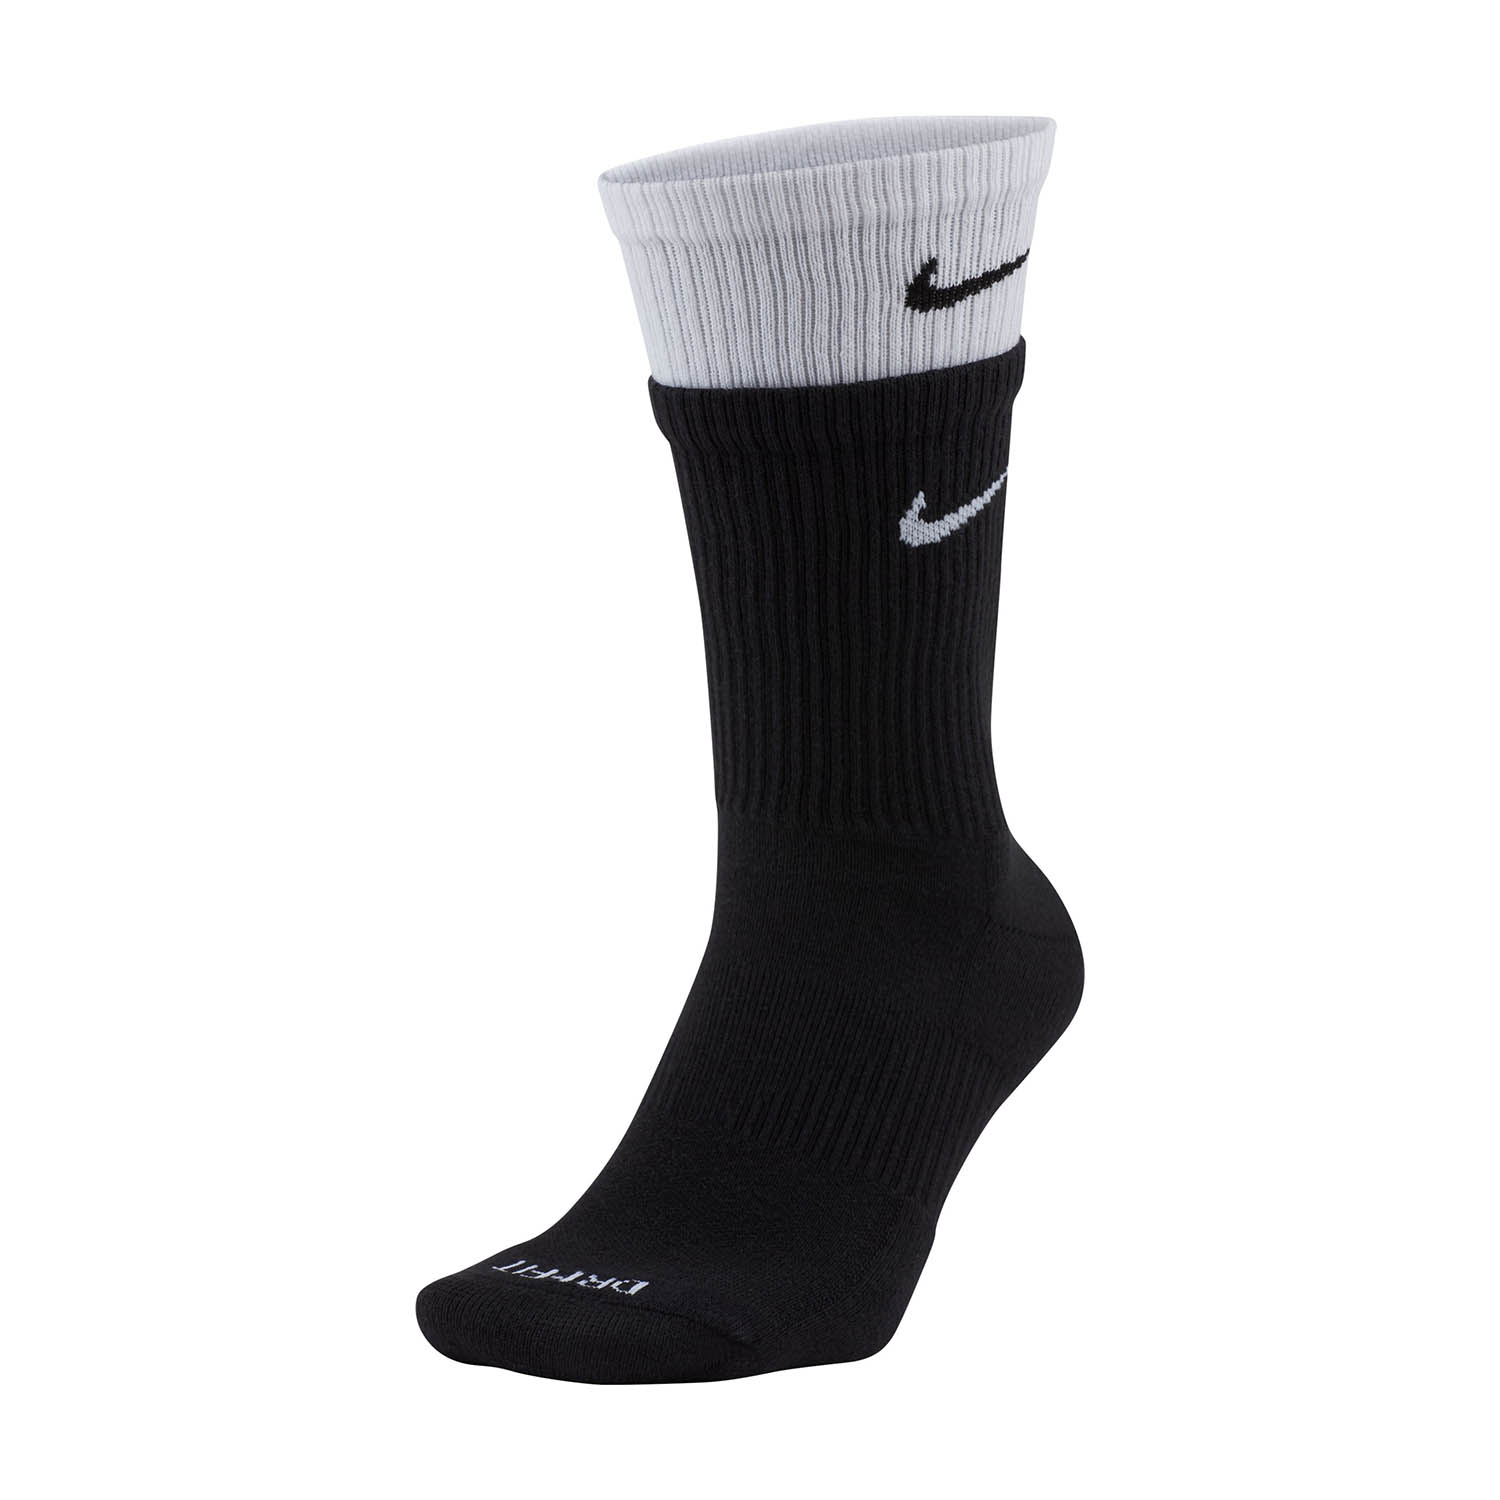 Nike Everyday Plus Cushioned Calcetines - Black/White